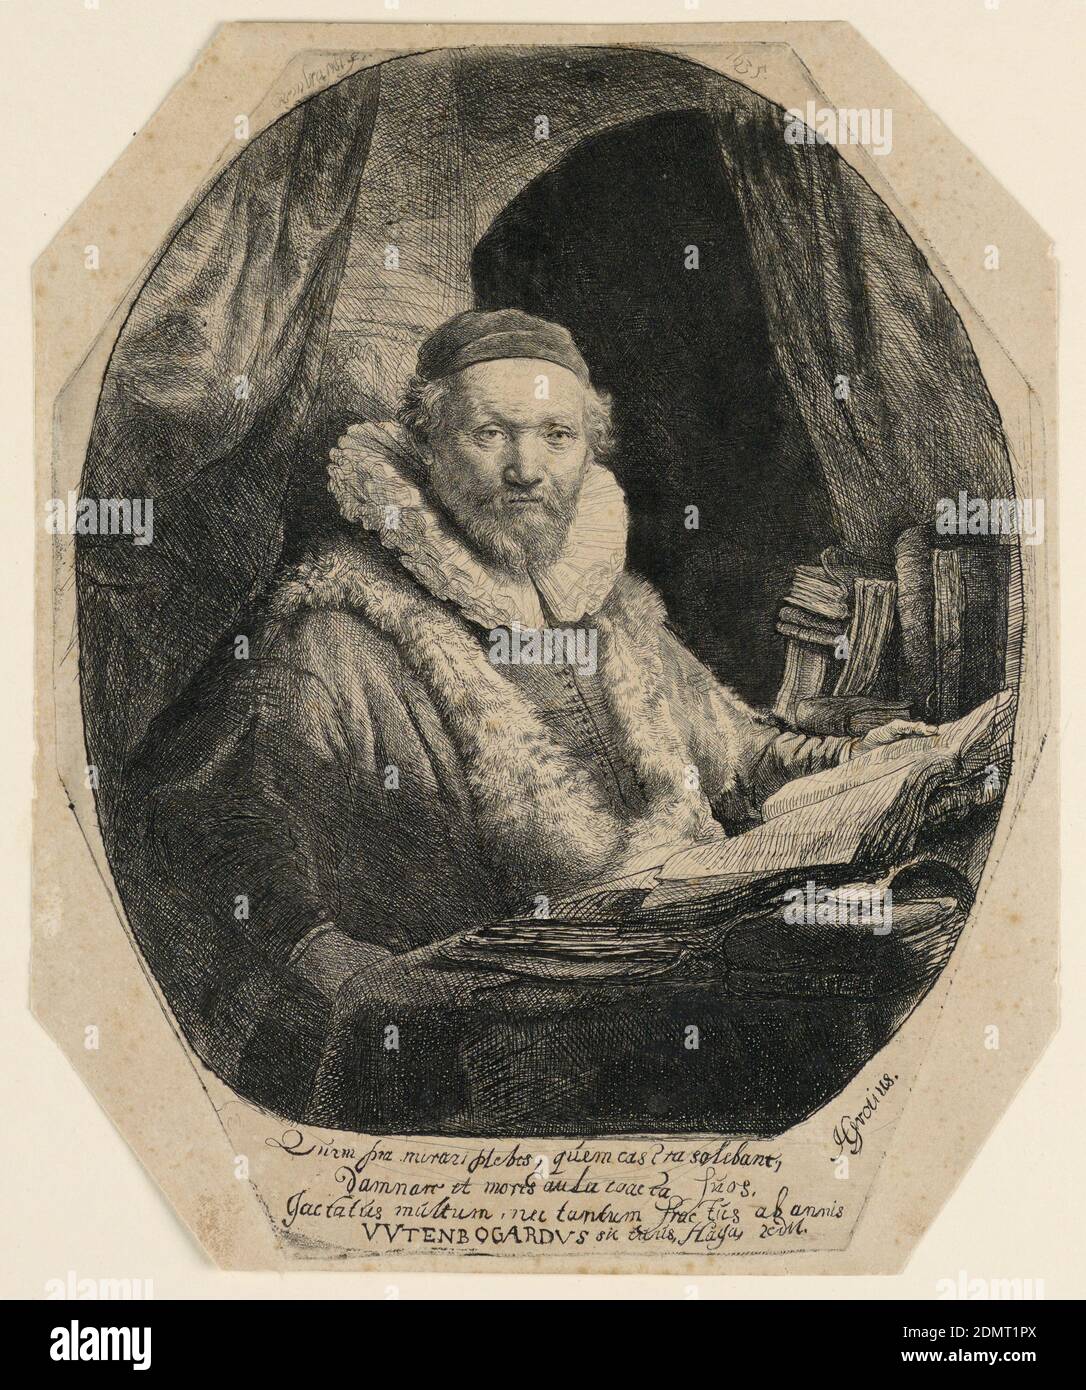 Jan Uytenbogaert (1557–1644), Preacher of the Remonstrants, Rembrandt Harmensz van Rijn, Dutch, 1606–1669, Etching on laid paper, Half-length portrait of the subject, turned toward the right, looking out at the spectator, head shown in three-quarter view. He is seated before a table on which are several books. His left hand supports an open volume., Netherlands, 1635, portraits, Print Stock Photo